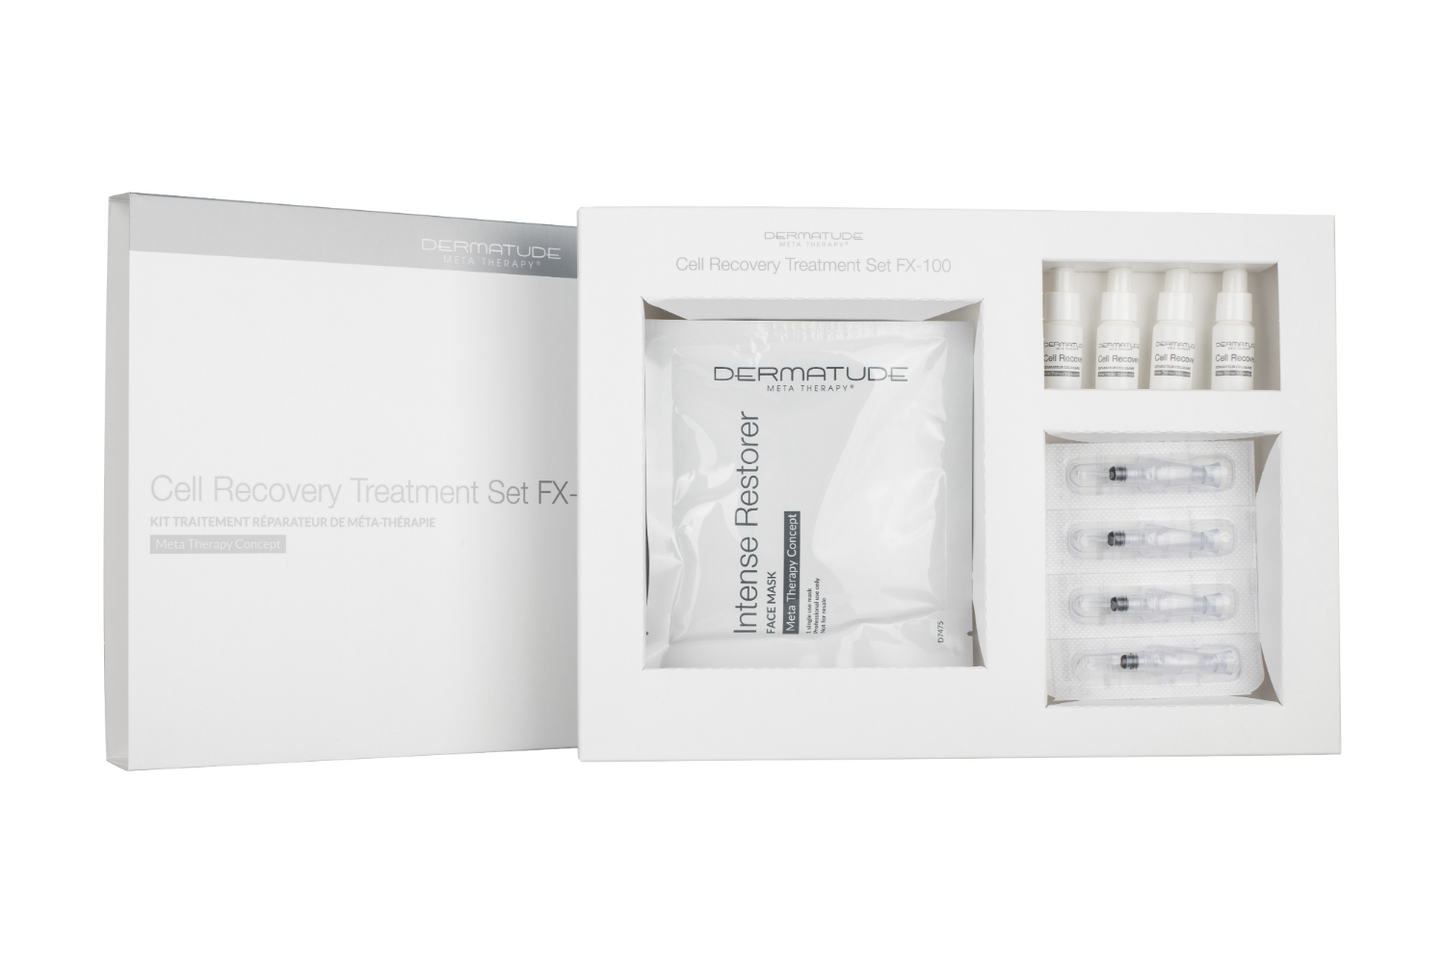 Dermatude FX-100 Cell Recovery Facial Treatment Set (4 treatments)